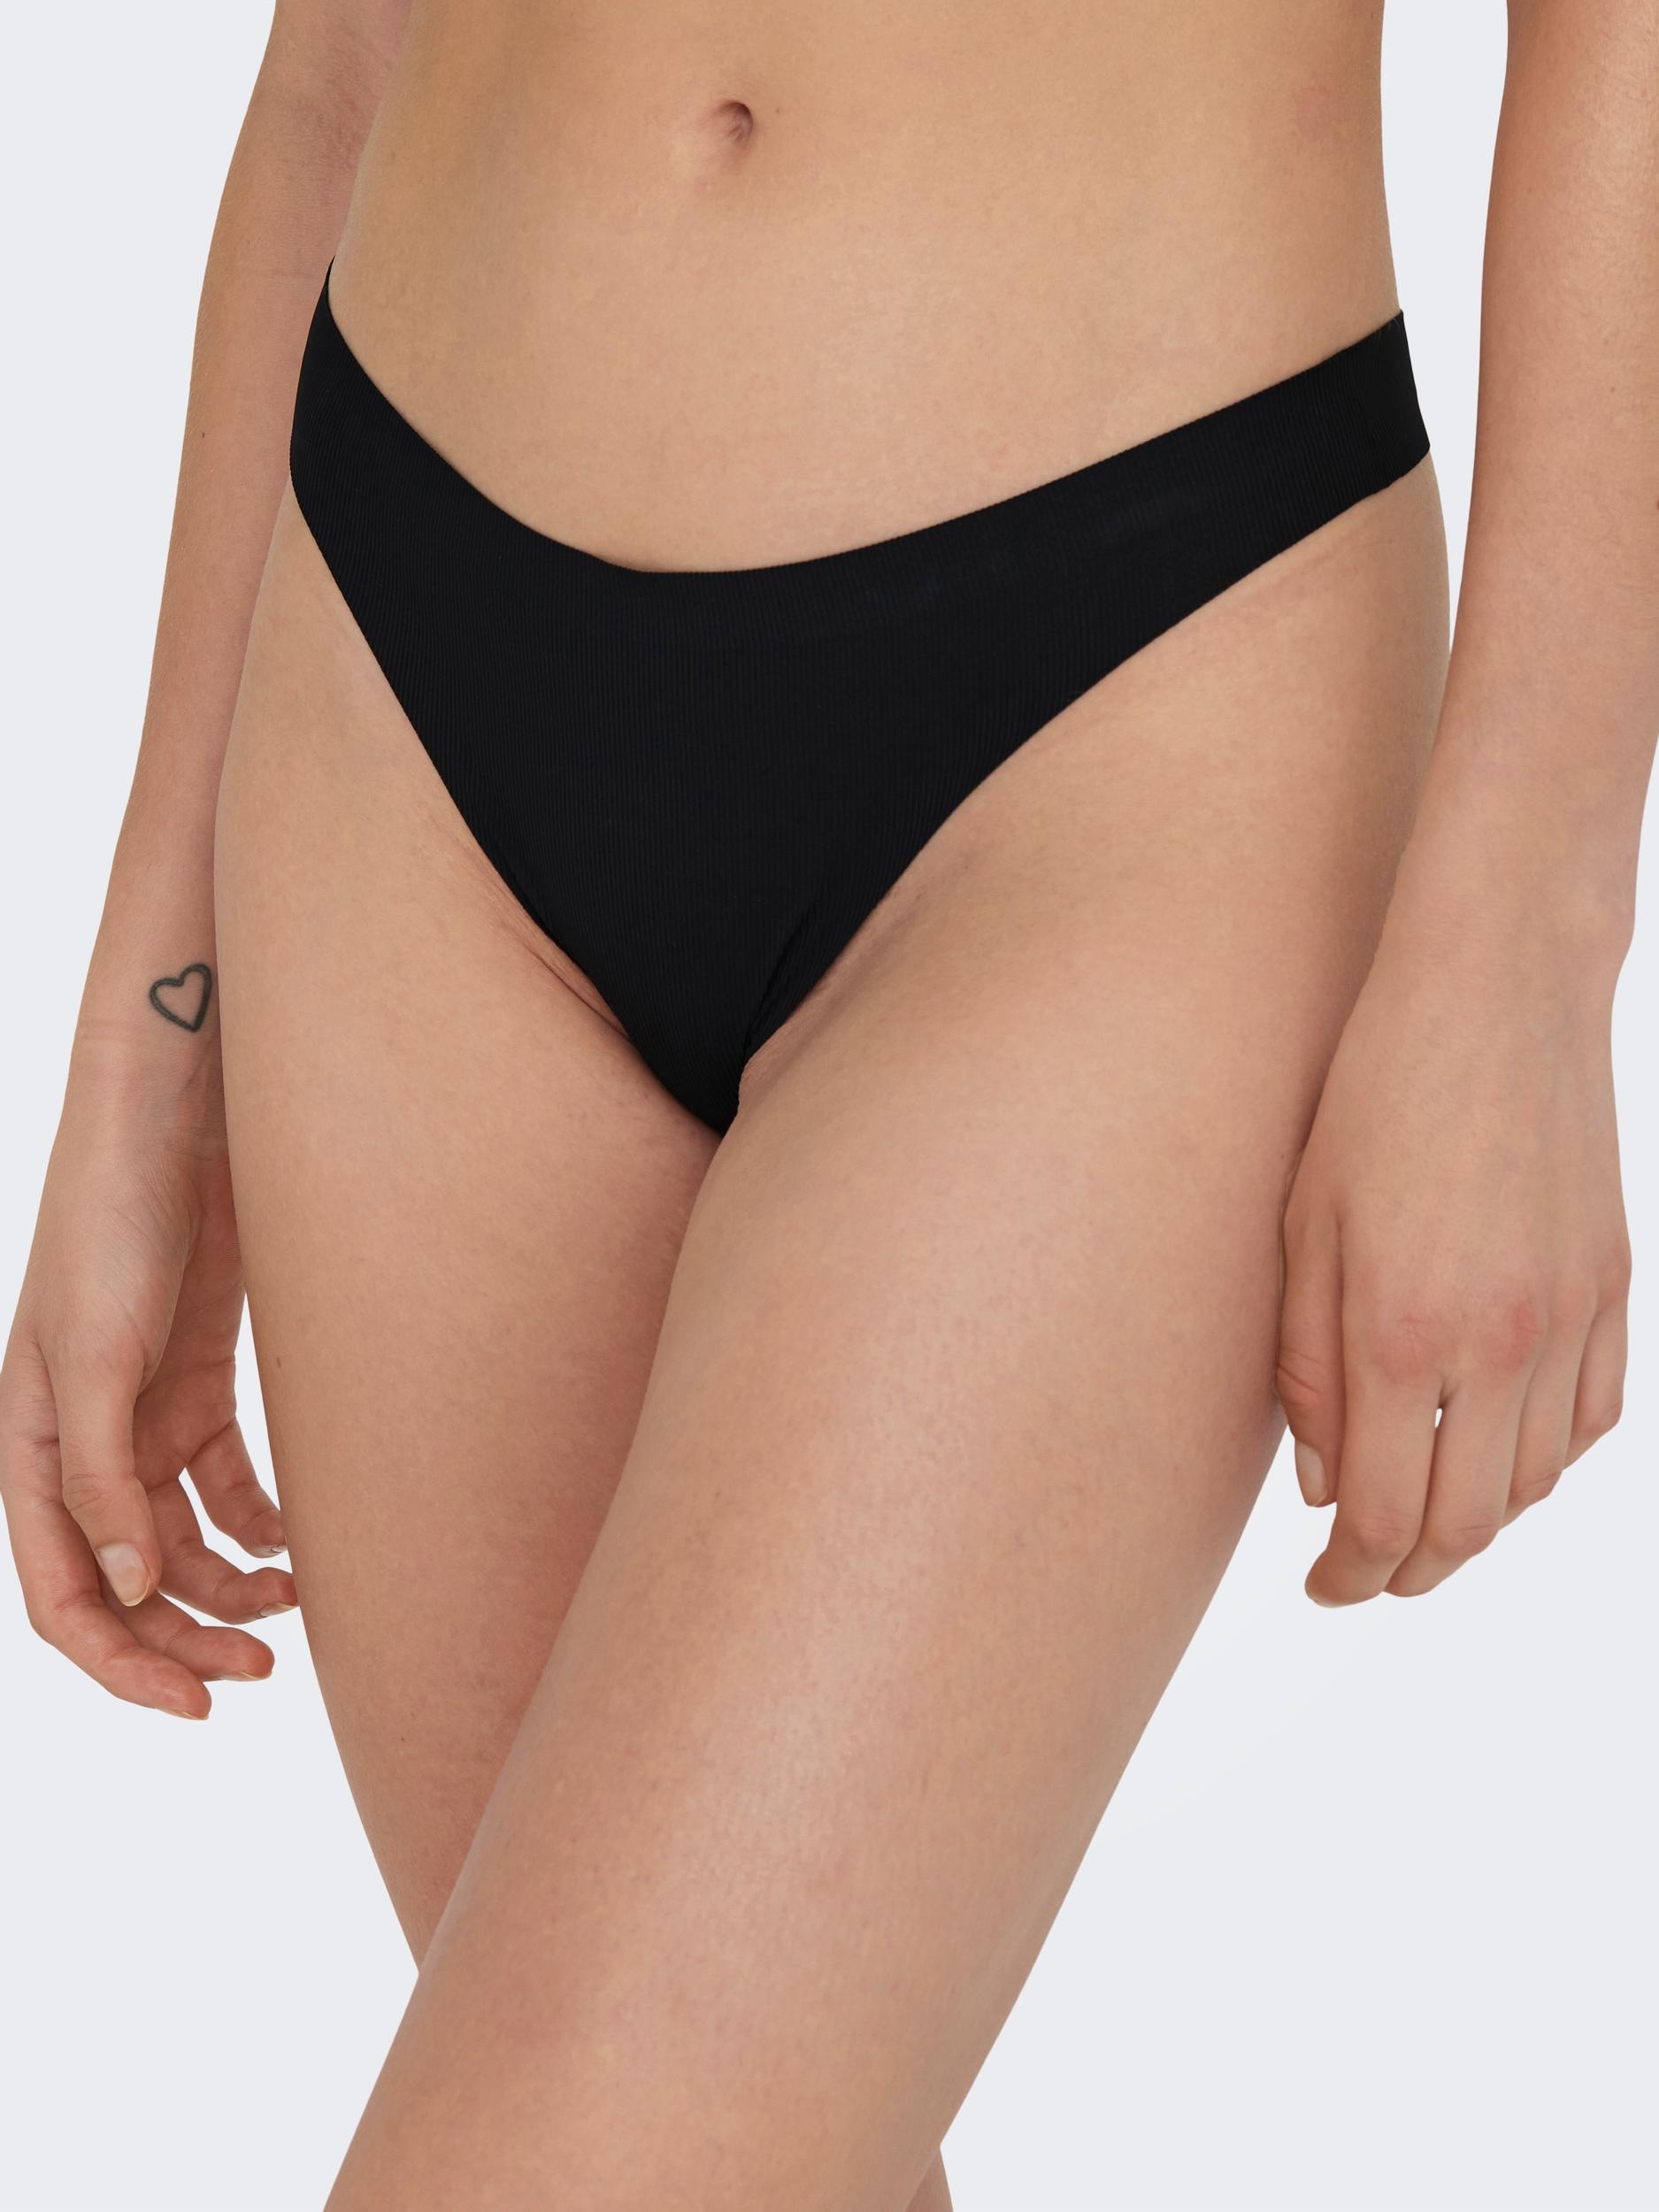 INVISIBLE 3 THONG«, »ONLTRACY bestellen ONLY (Set, String St.) 3-PACK | RIB BAUR